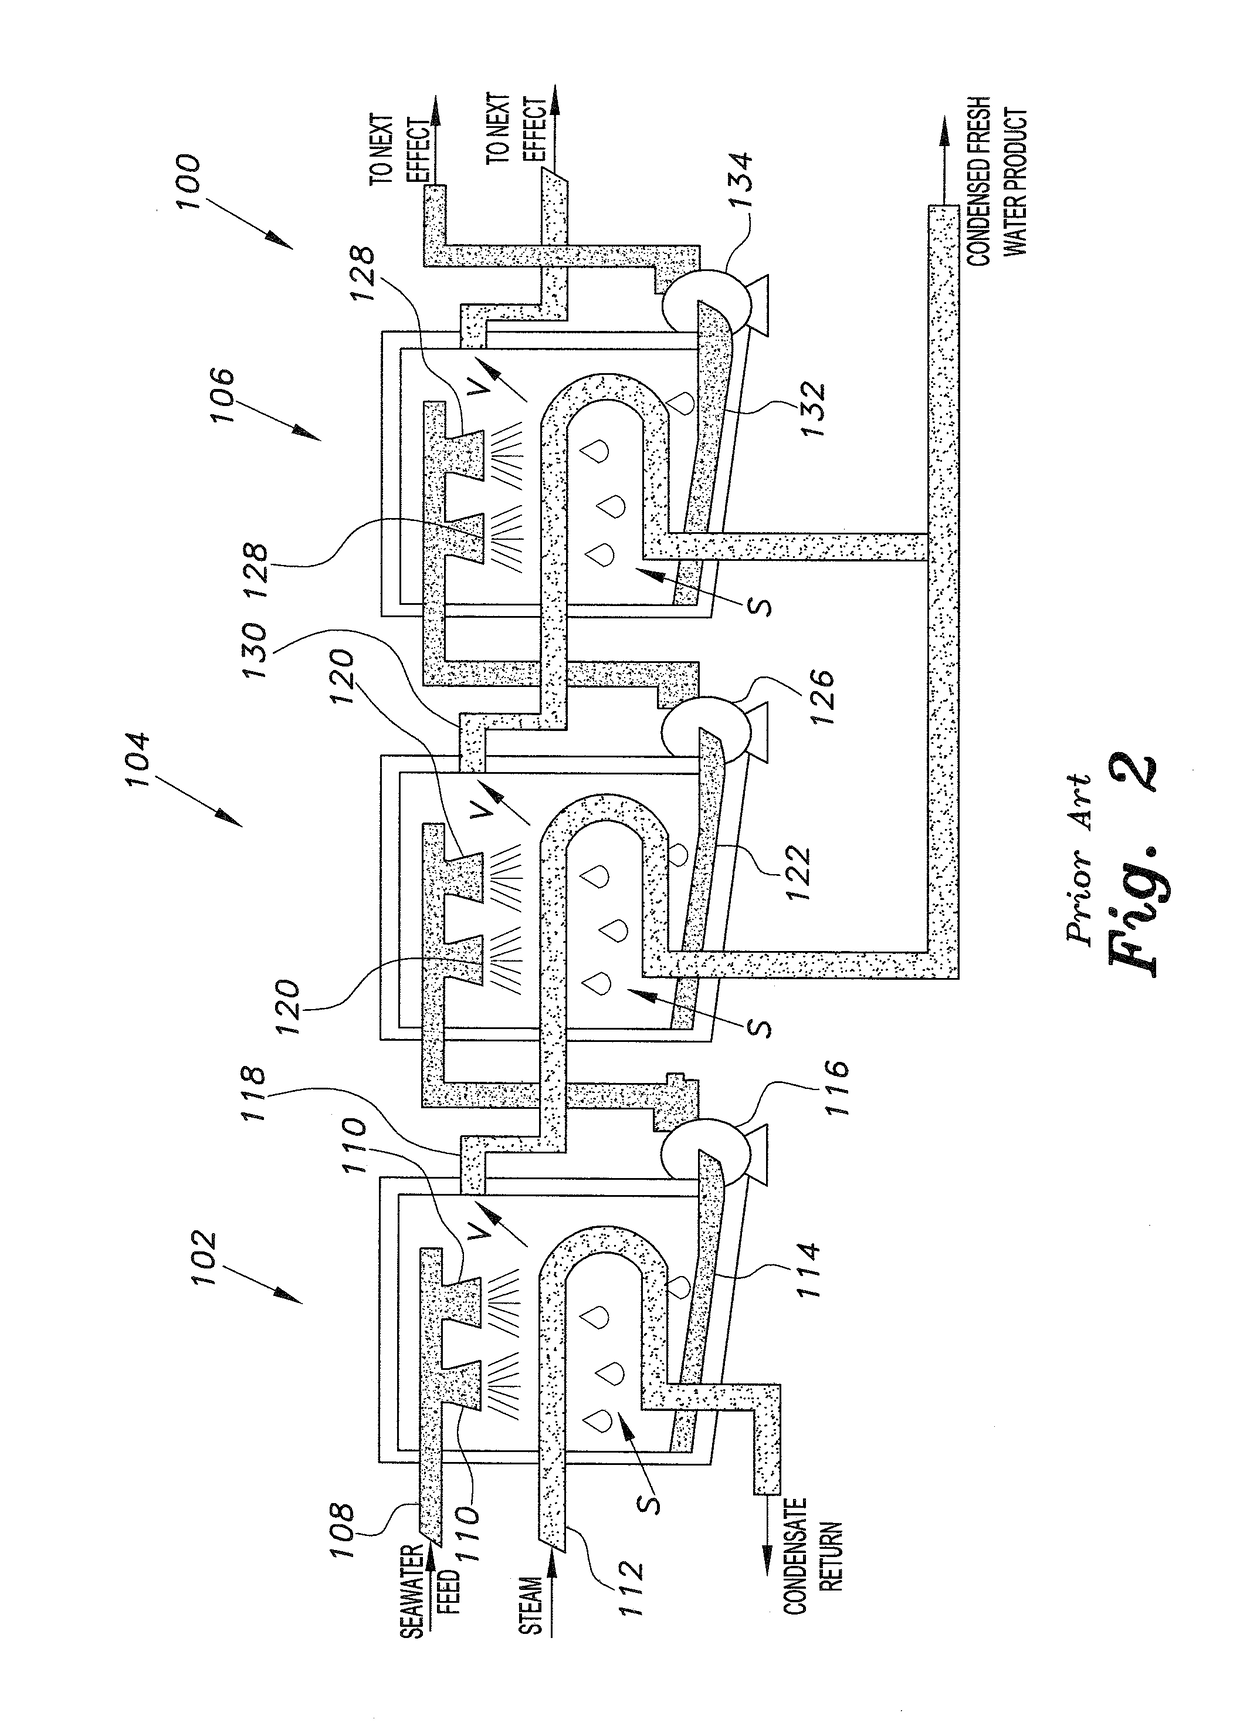 Combination multi-effect distillation and multi-stage flash evaporation system